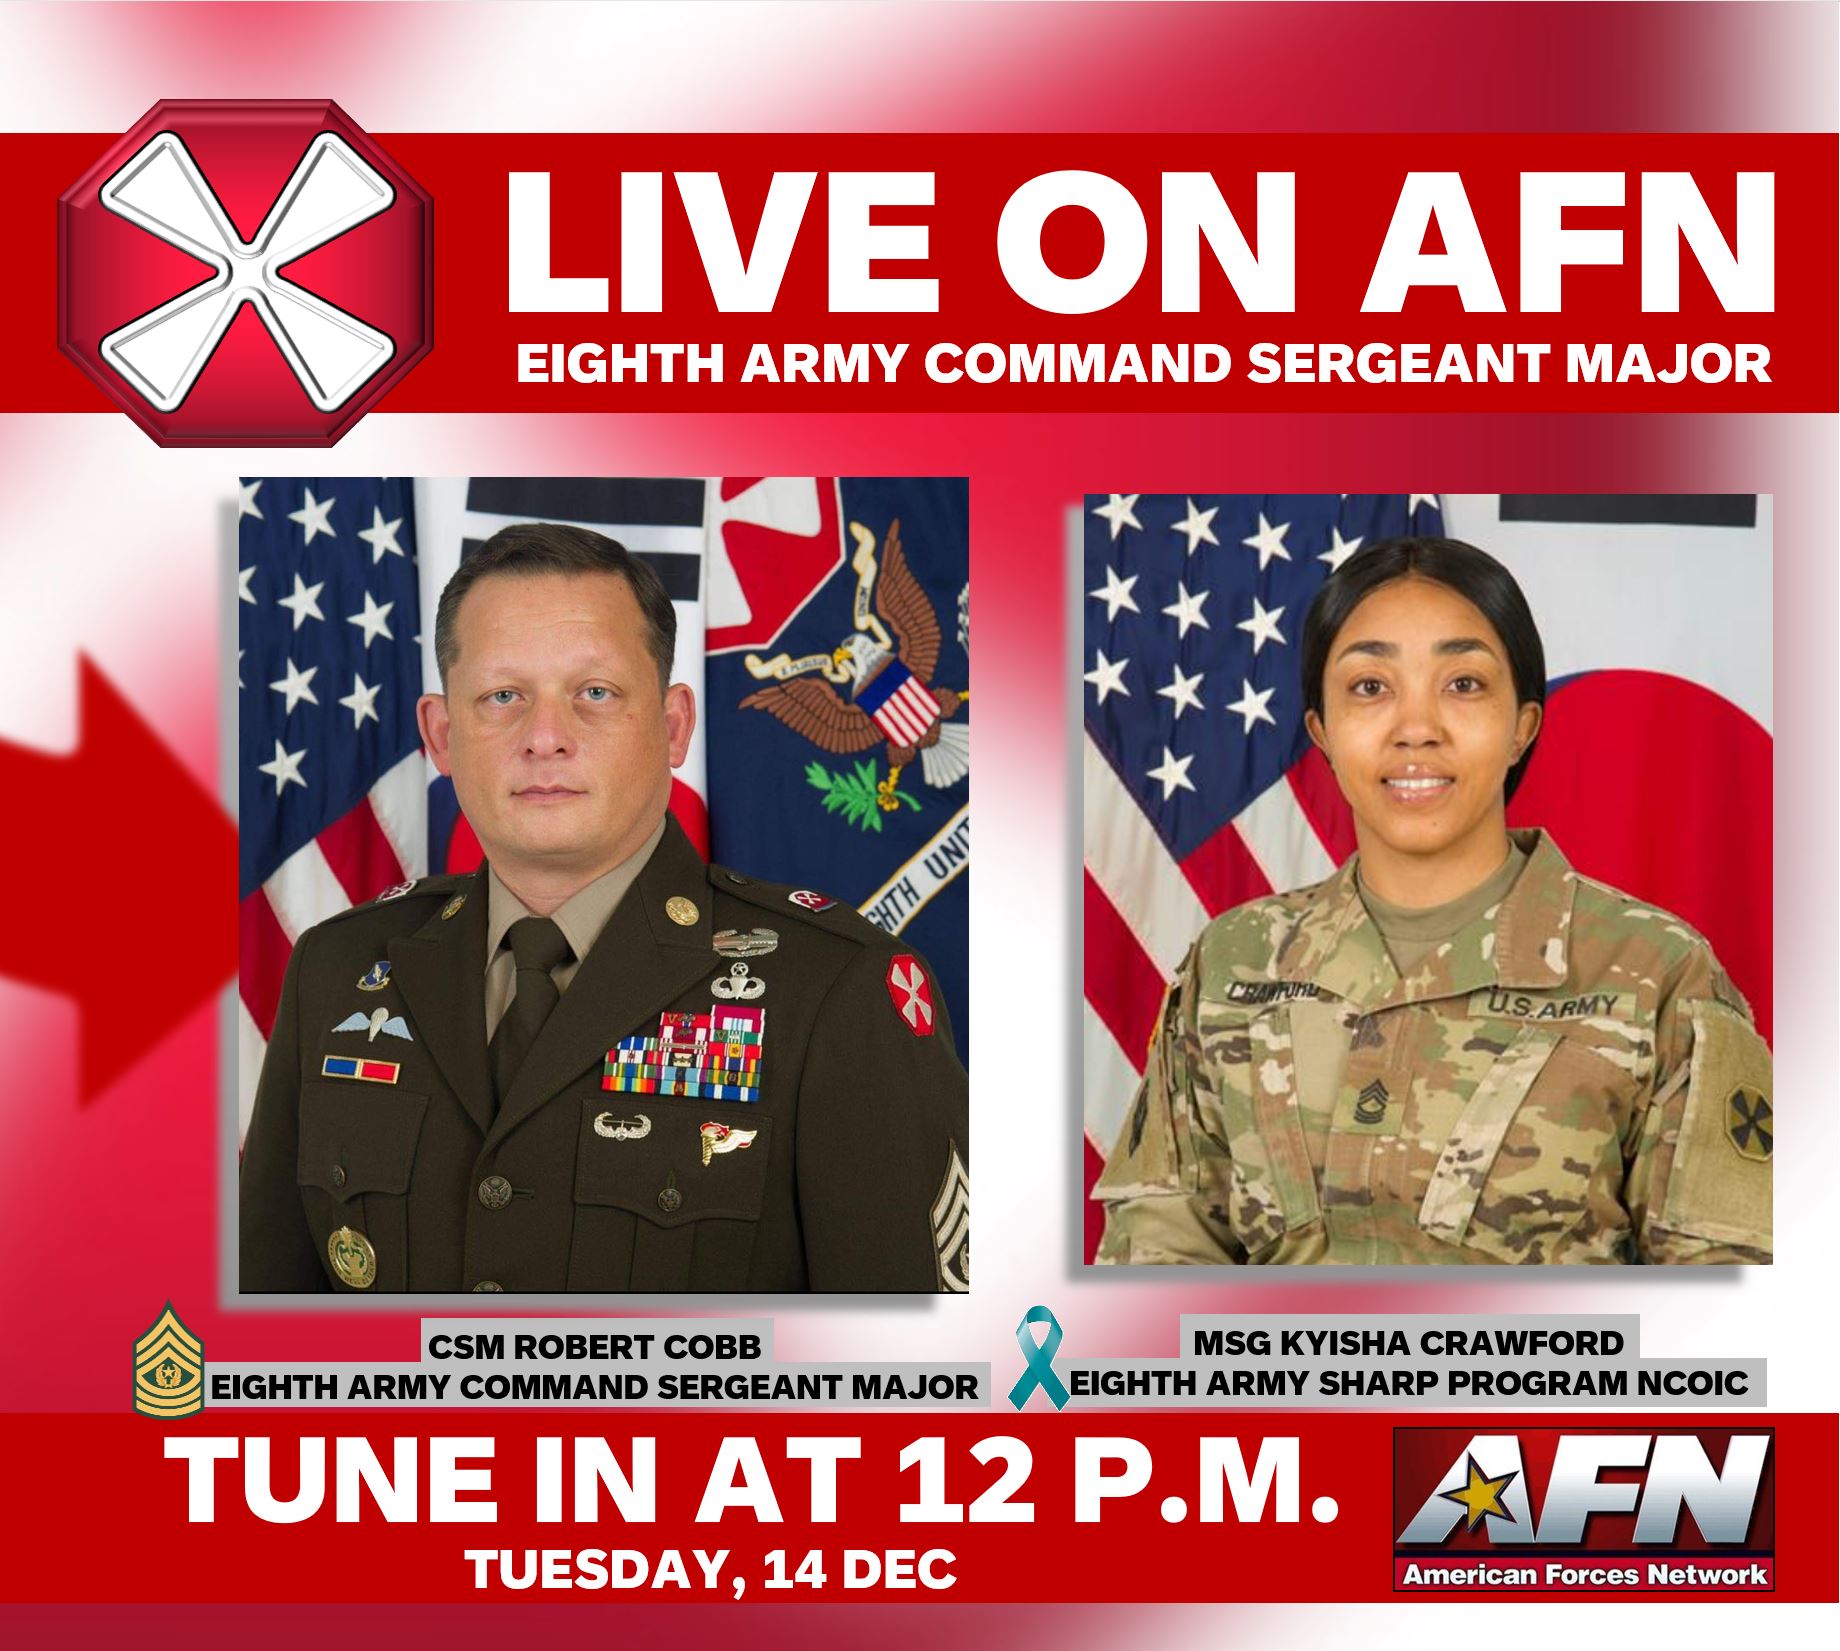 Eighth Army On Twitter: Tune In To Afn At Noon To Hear Eighth Army's Csm  Robert Cobb Live On The Radio! He'll Discuss Elements Of The Army's Sharp  Program With Master Sgt.